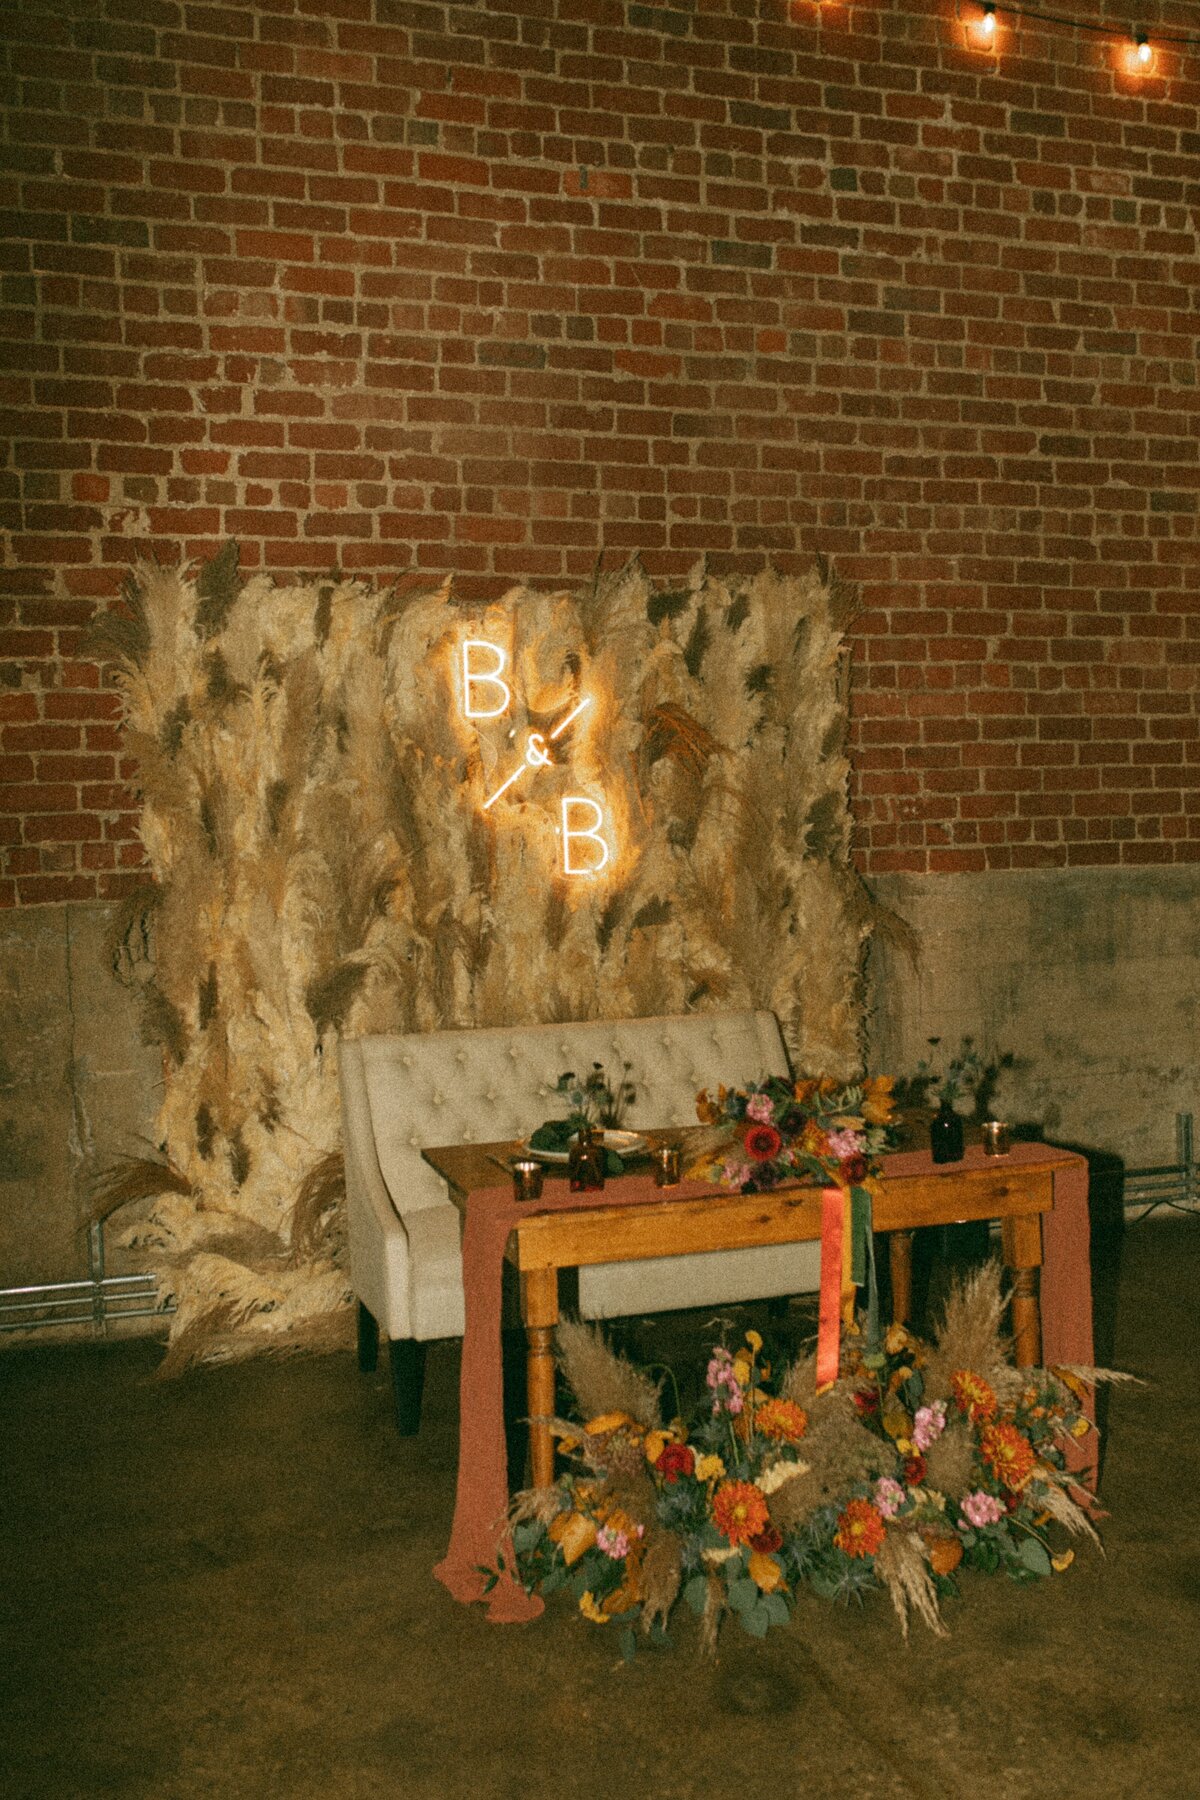 A wedding reception setup designed by a top wedding coordinator in Iowa, with a floral table, couch, and a backdrop featuring illuminated initials "b&amp;b" on a brick wall.